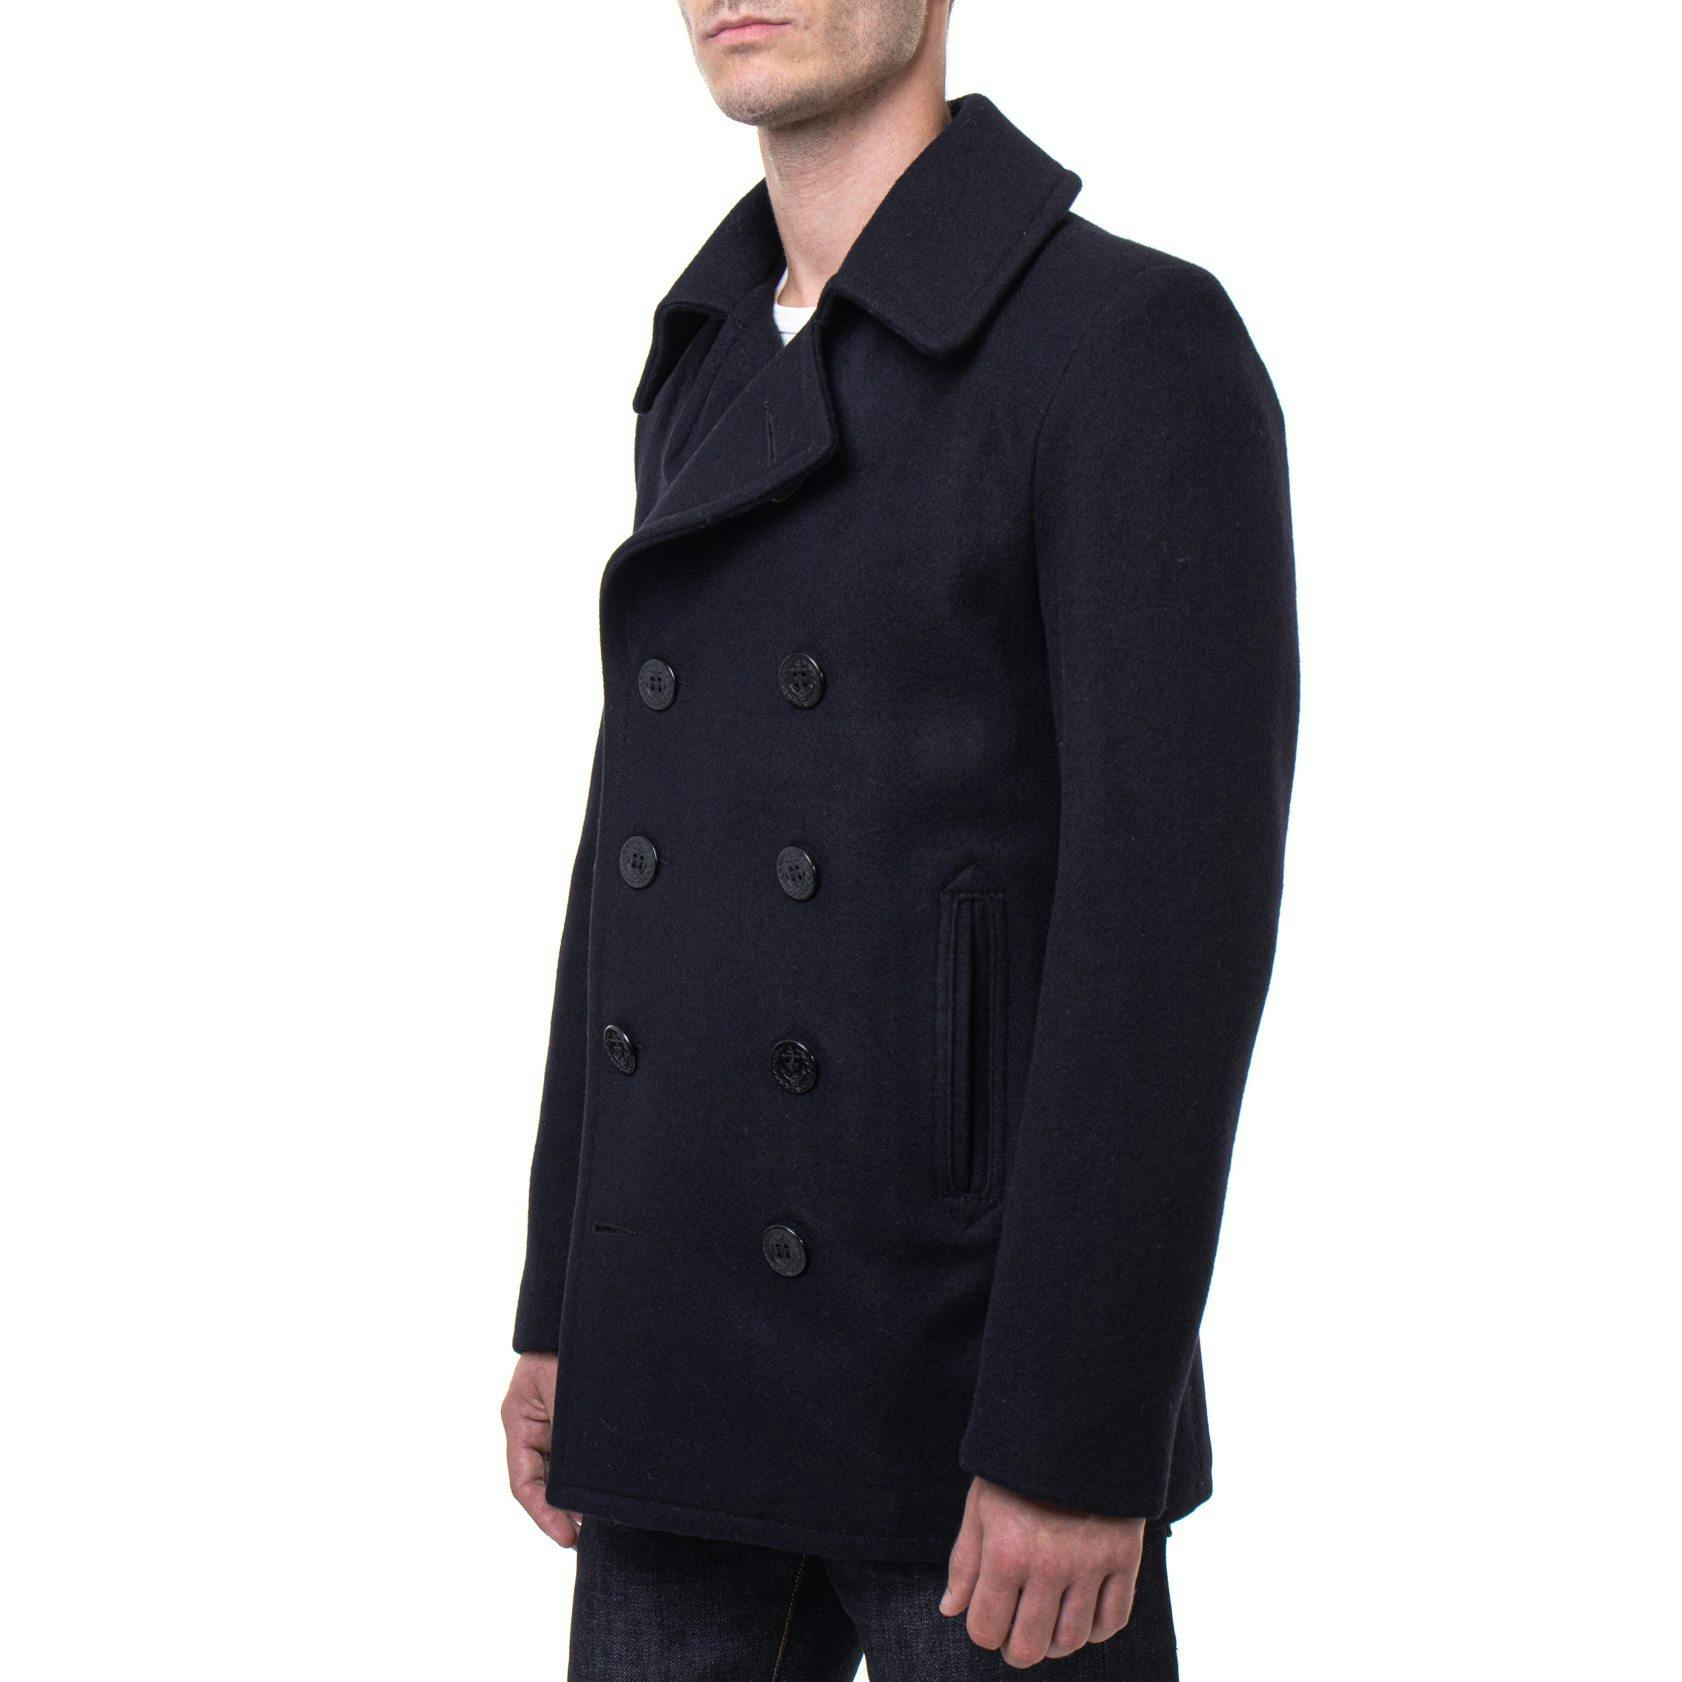 Schott Double-Breasted Tailored Peacoat